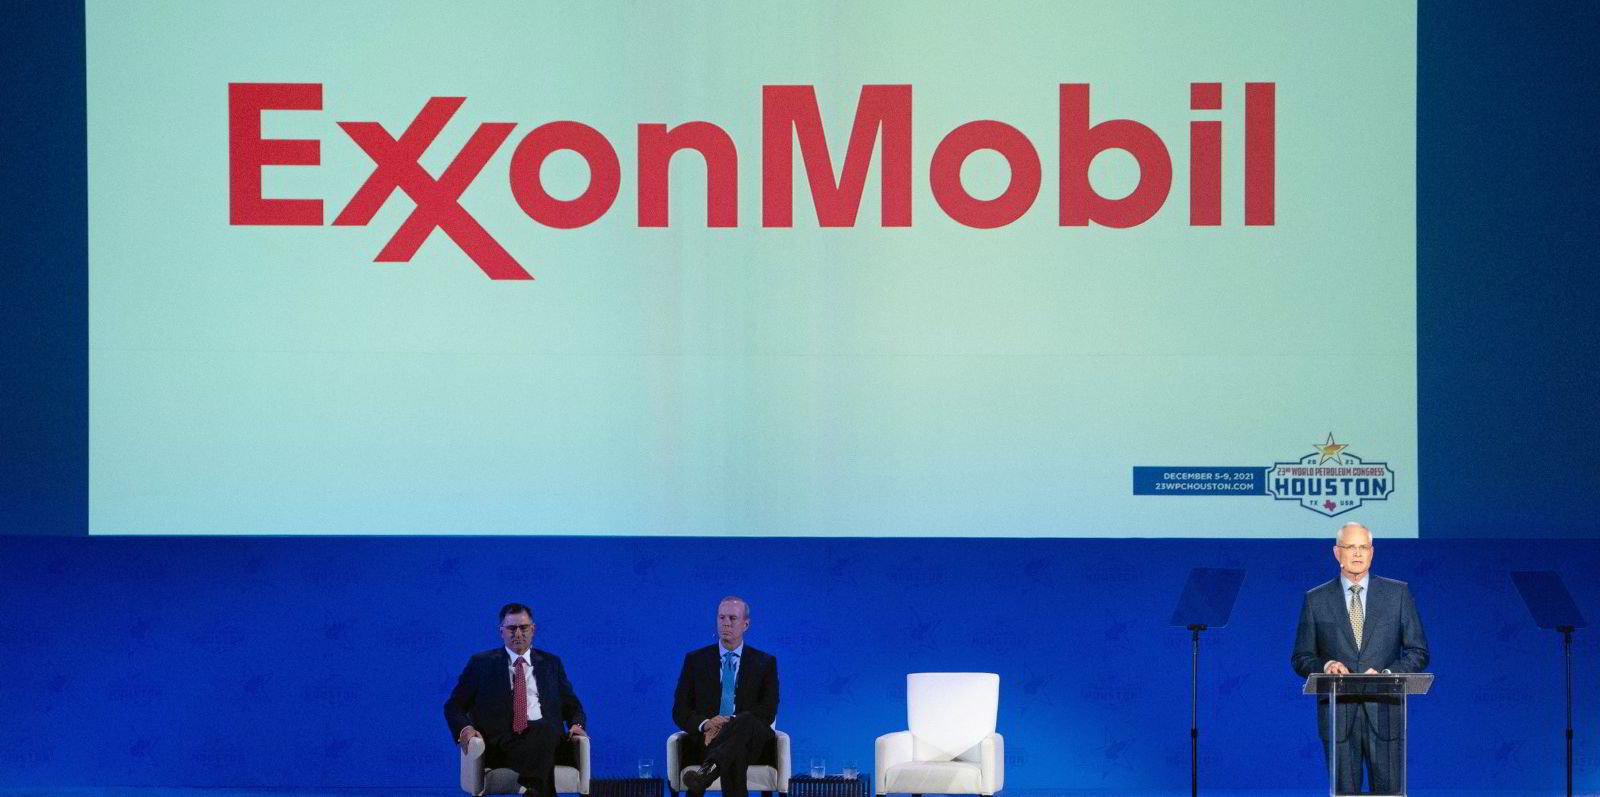 Work at Exxon Mobil: Careers and Opportunities